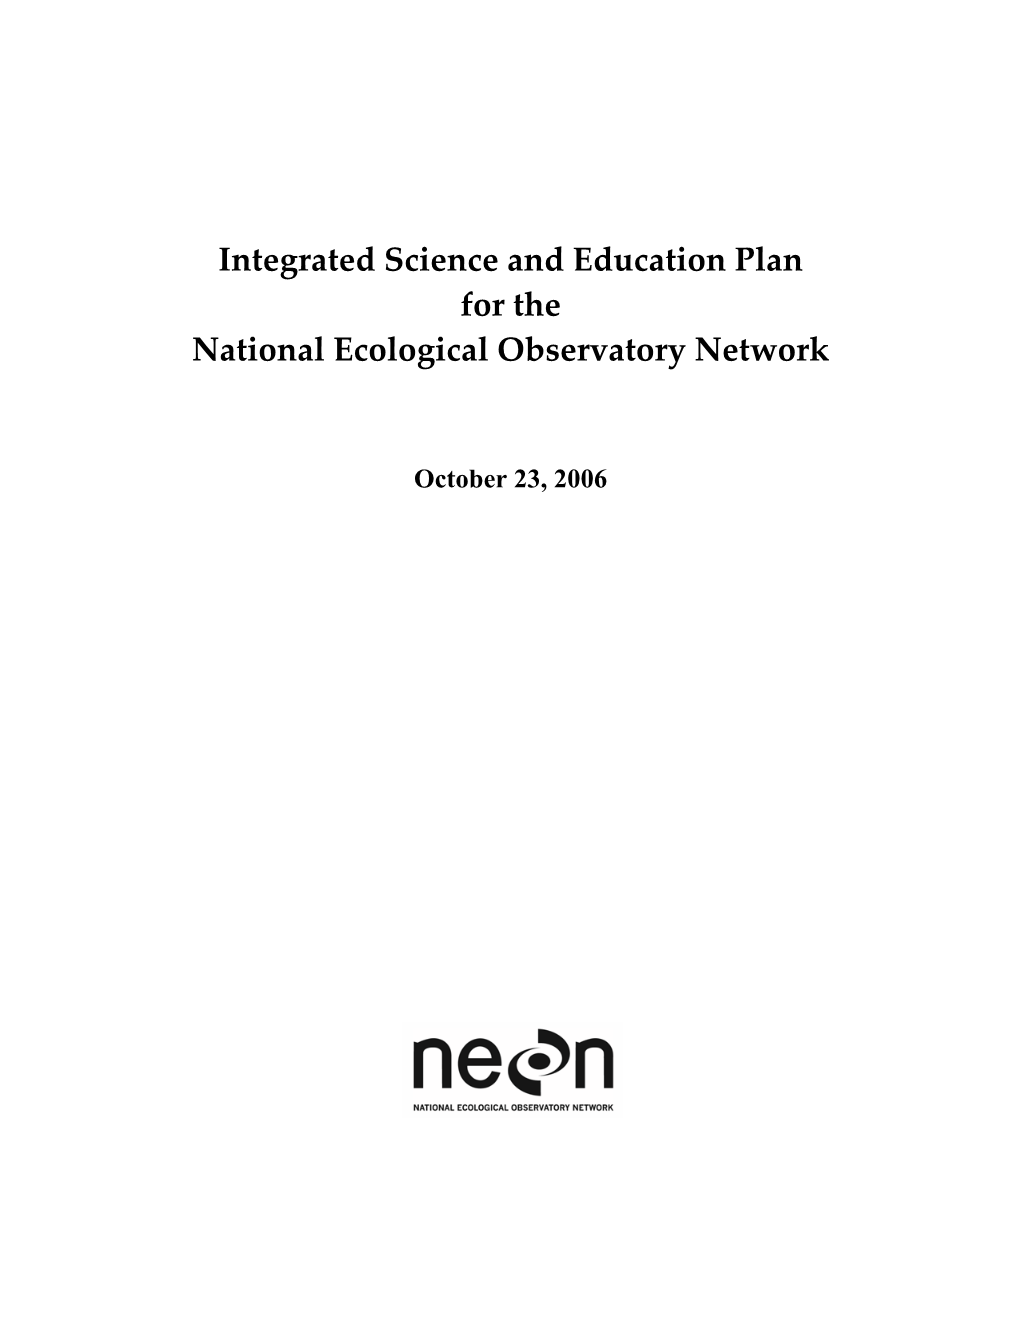 Integrated Science and Education Plan for the National Ecological Observatory Network